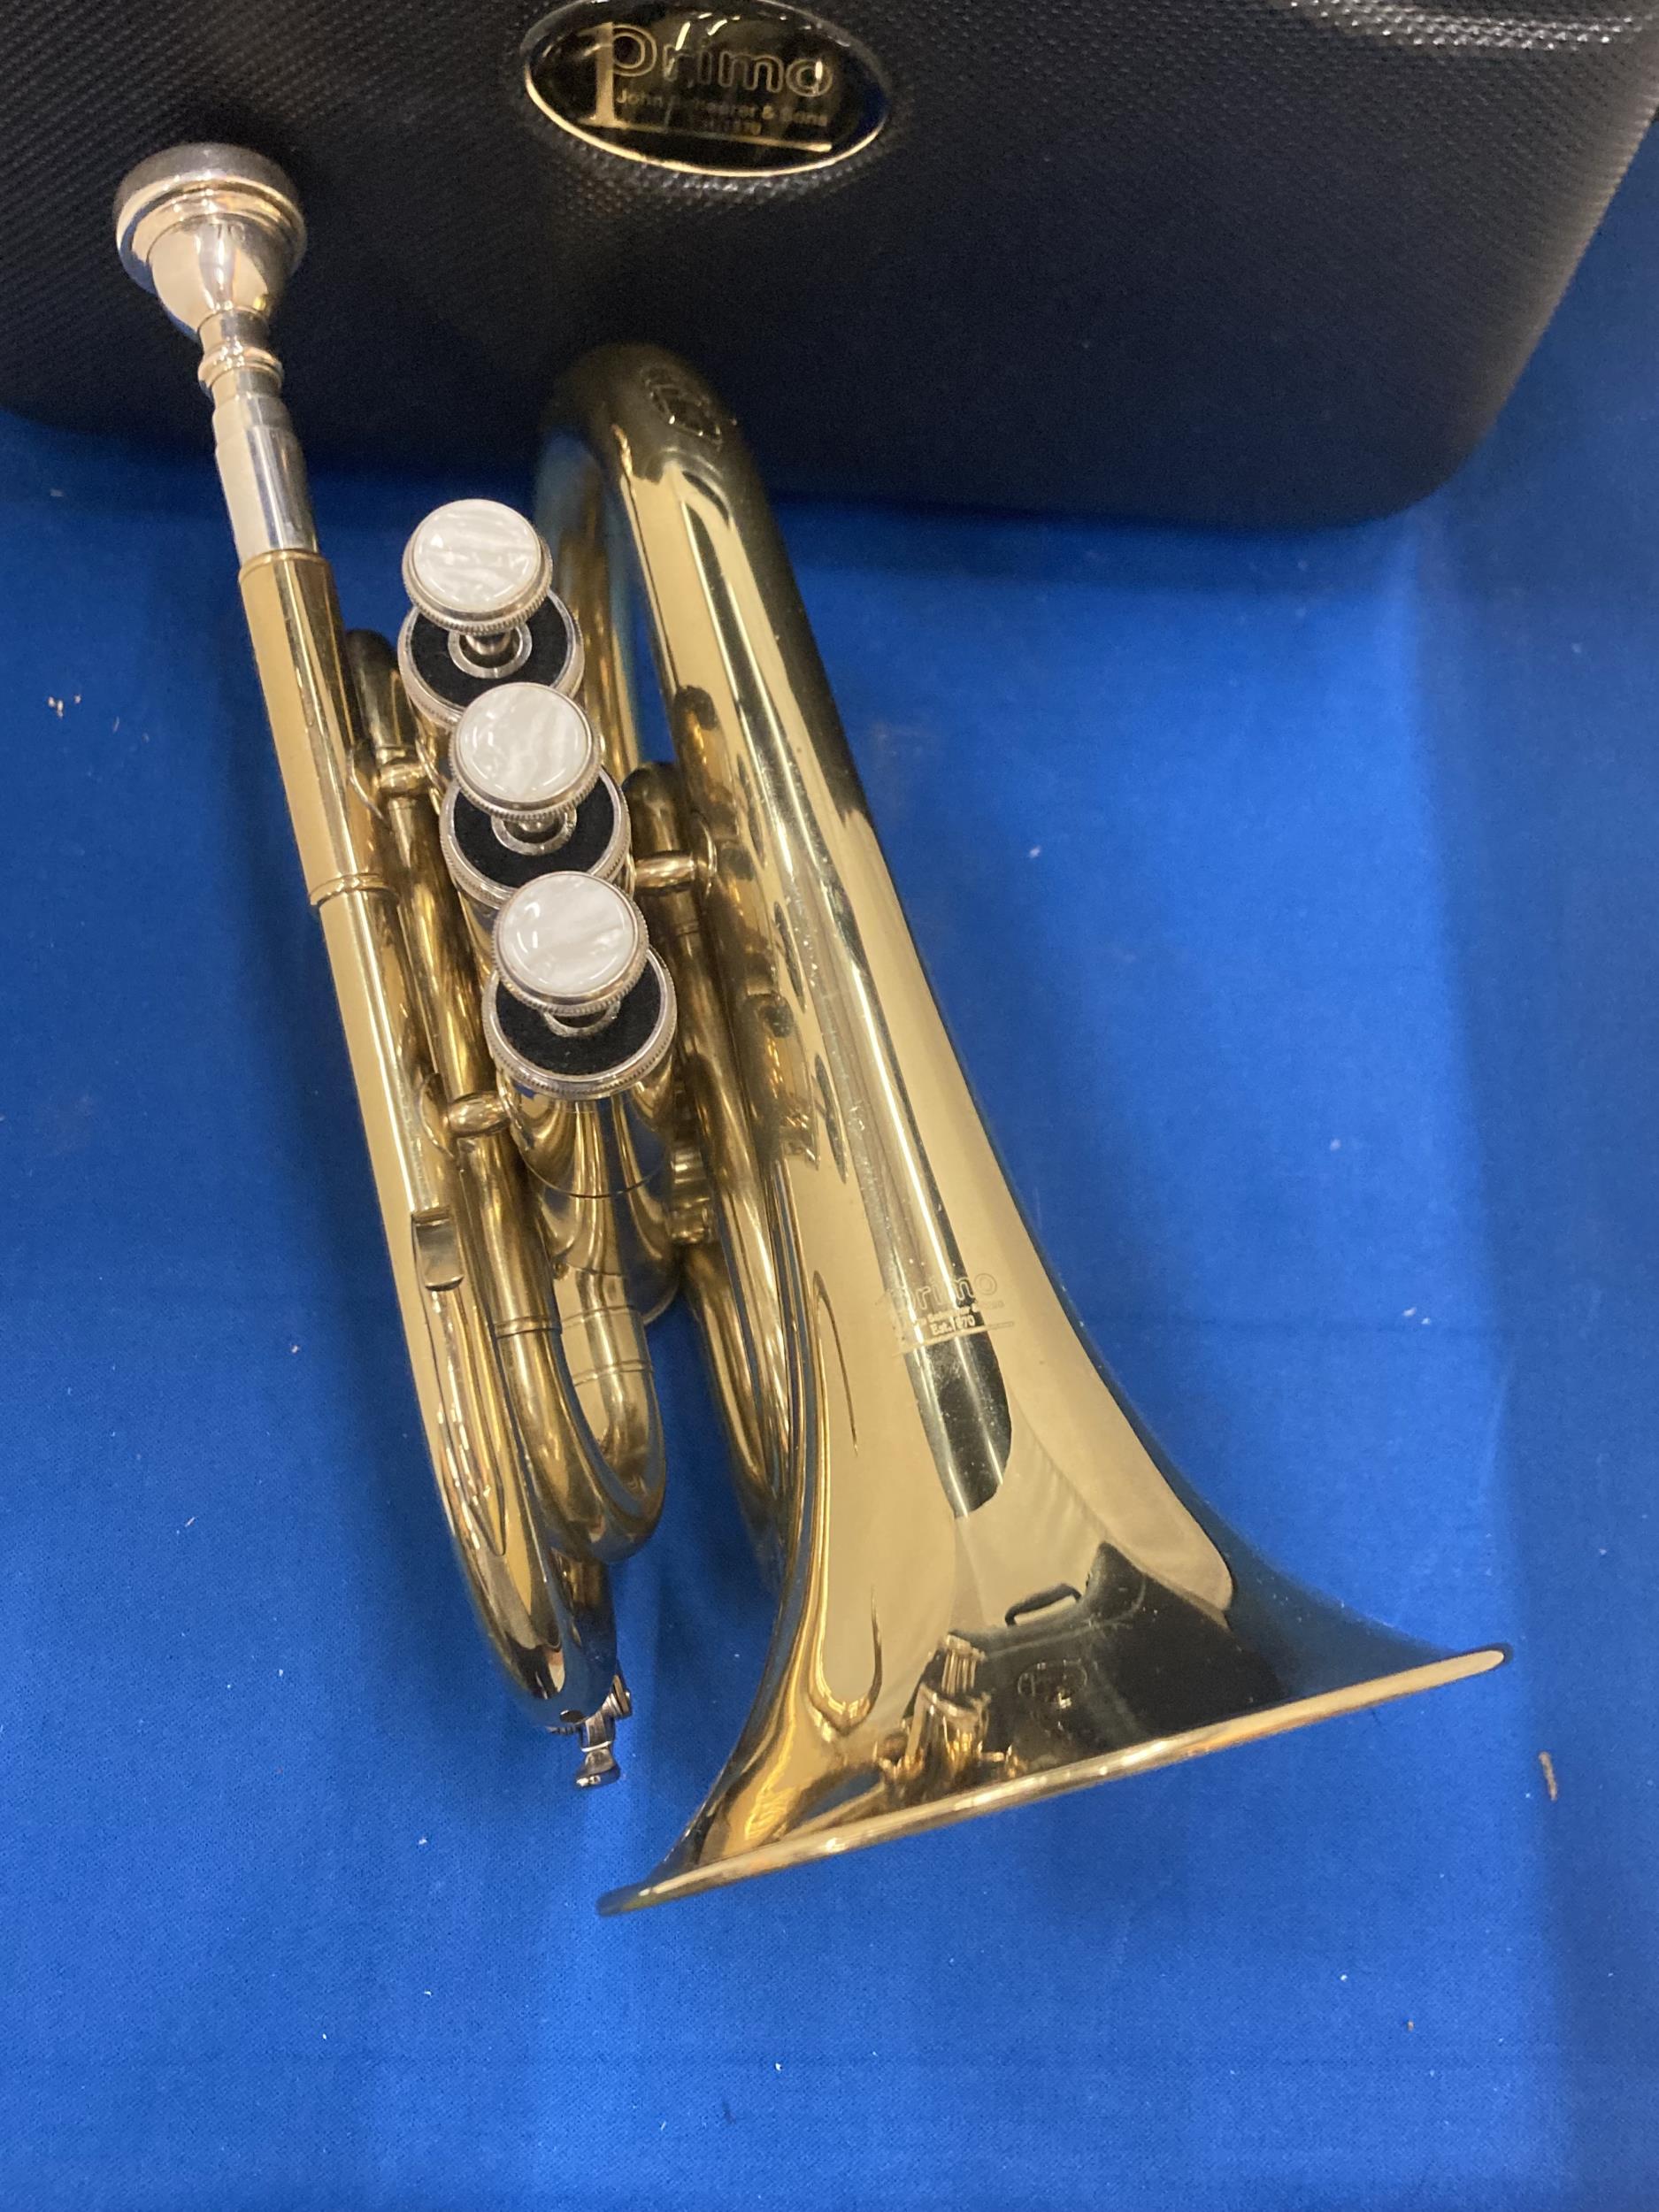 A JOHN SCHEERER & SON PRIMO POCKET TRUMPET WITH CASE - Image 4 of 4